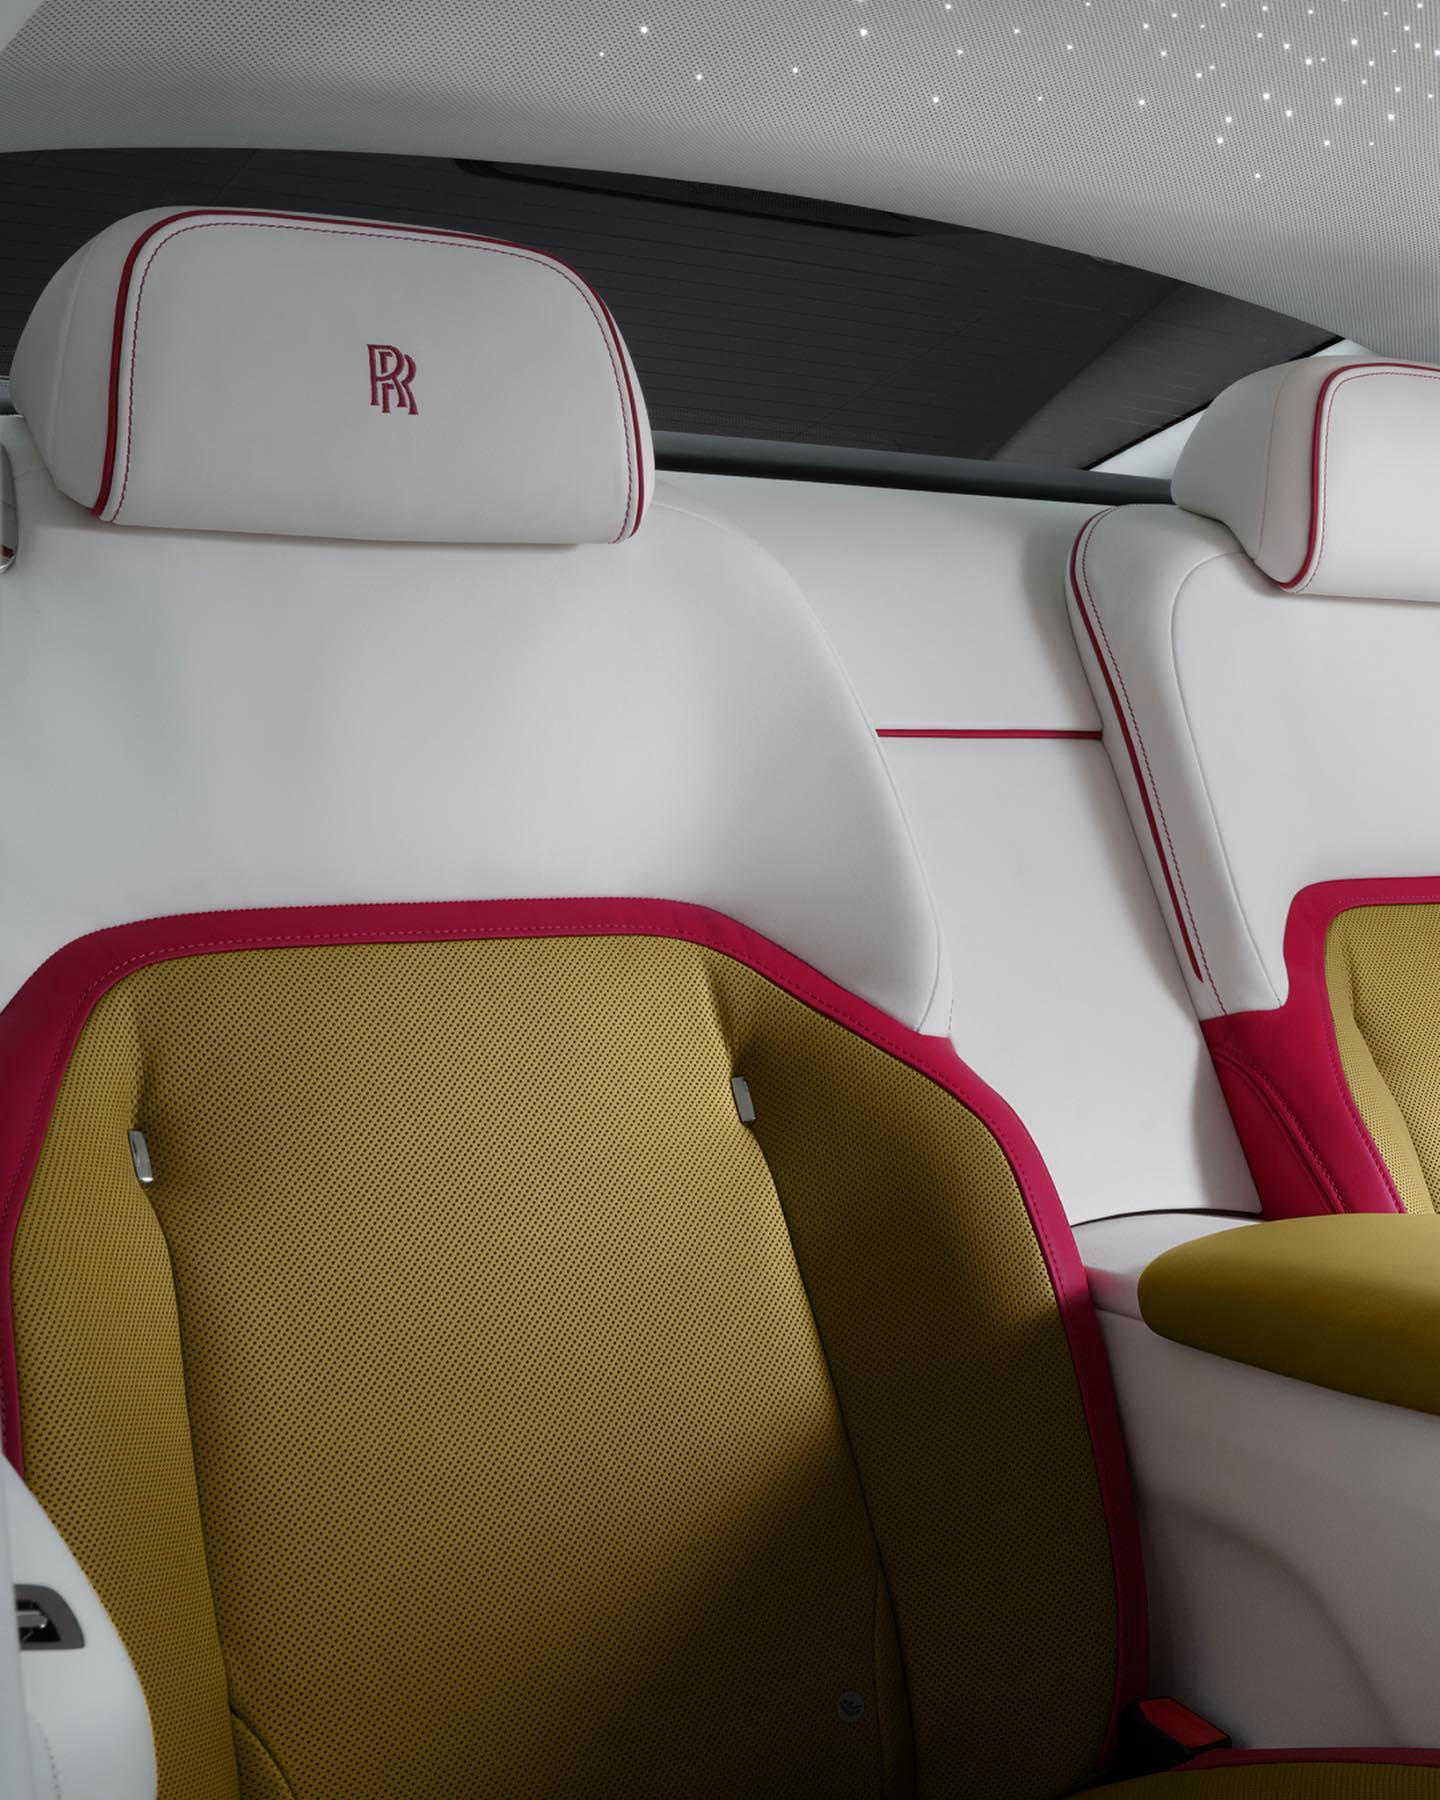 Rolls-Royce Motor Cars - Spectre's continuous rear seat wraps itself around the passenger, cocooning